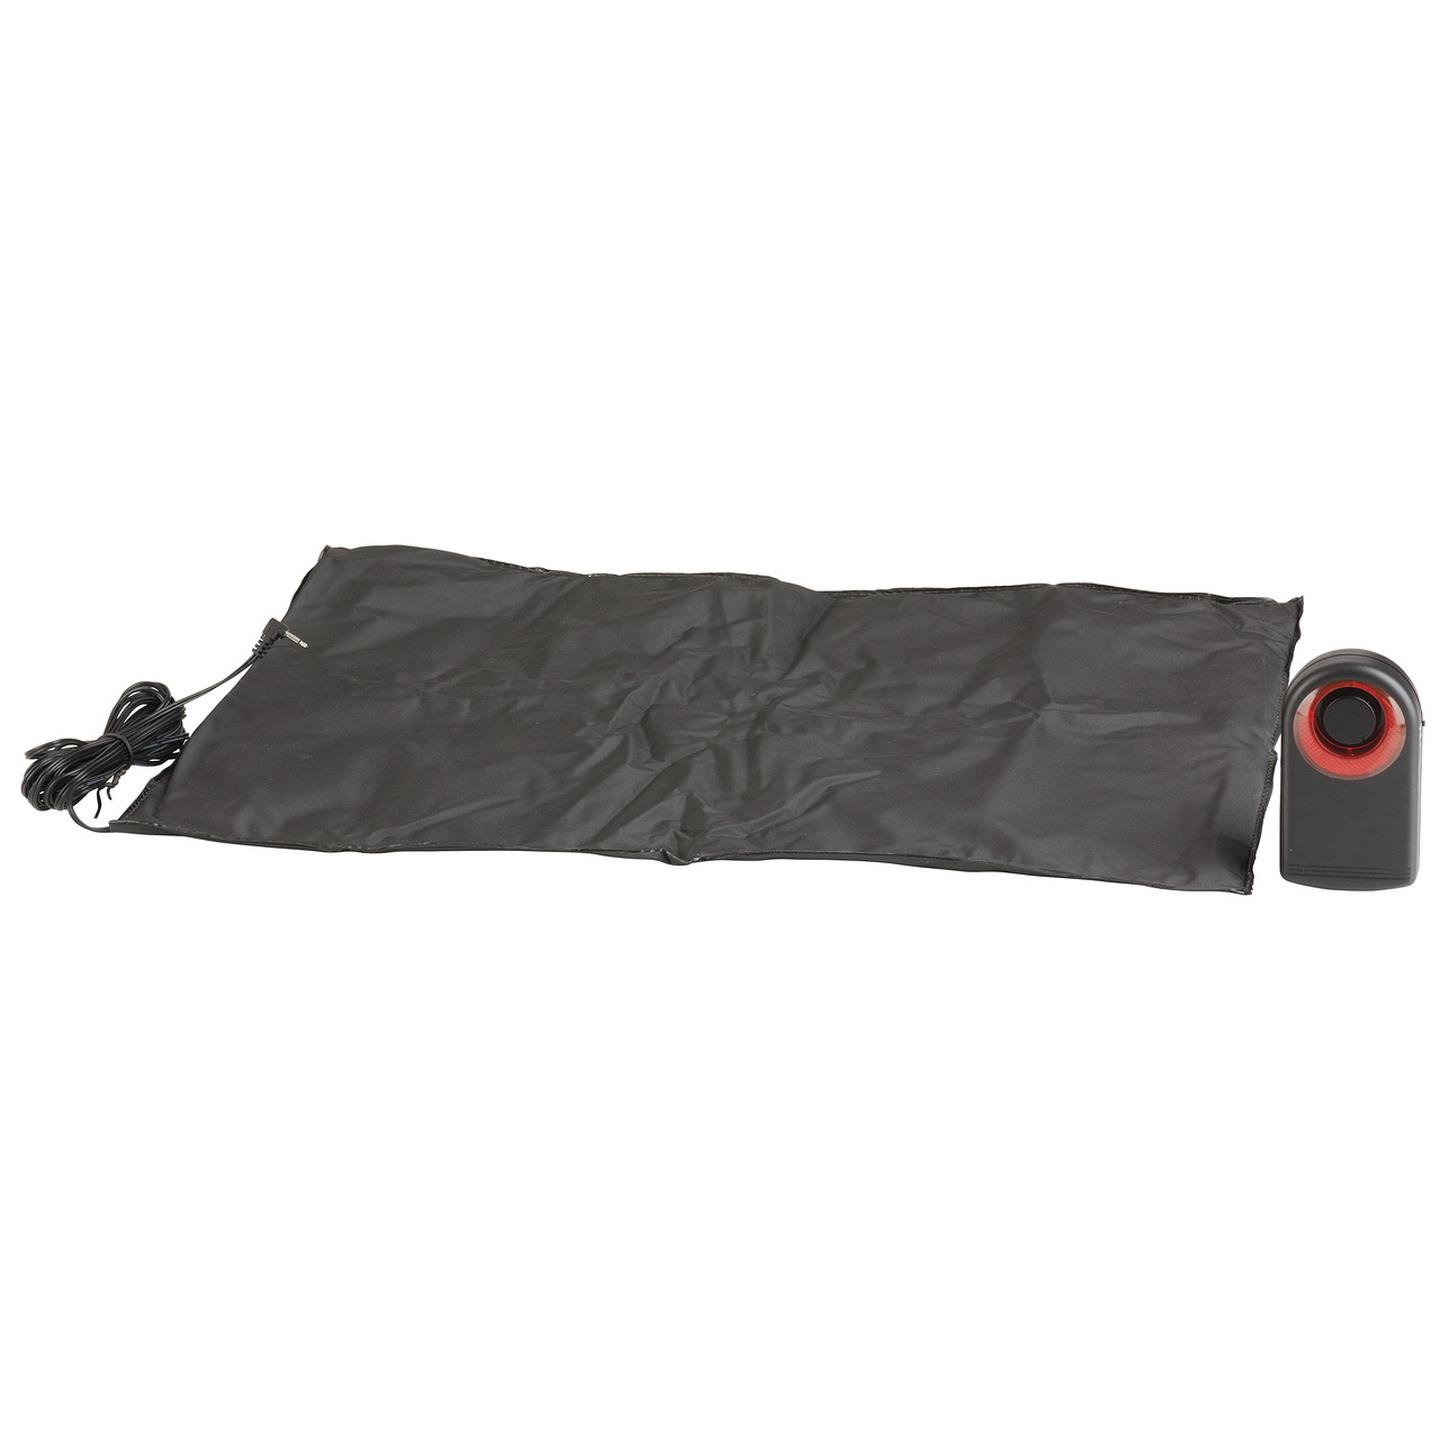 Pressure Activated Mat Alarm with Siren and Strobe